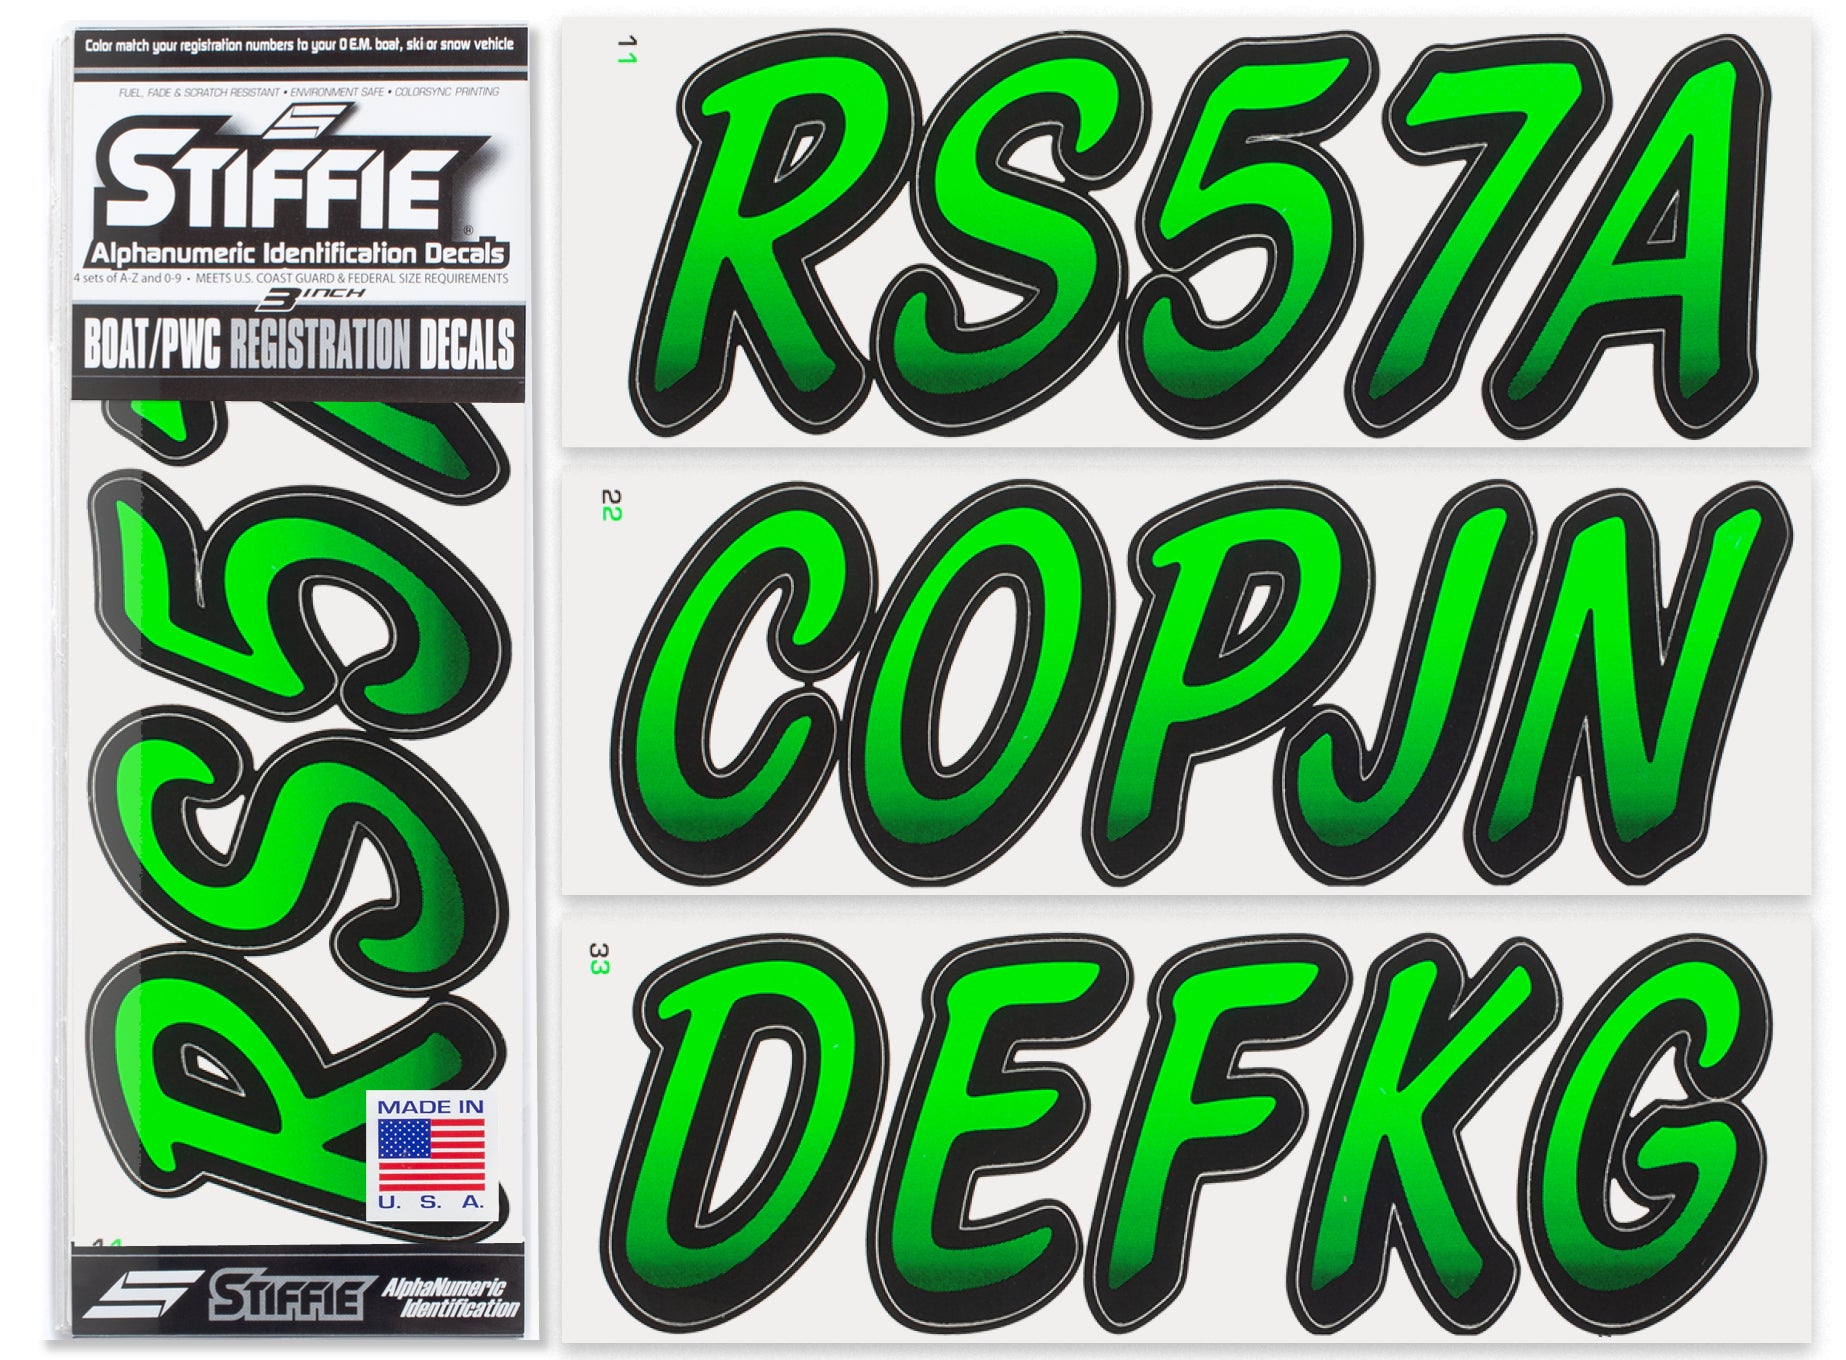 STIFFIE Whipline Electric Green/Black 3" Alpha-Numeric Registration Identification Numbers Stickers Decals for Boats & Personal Watercraft